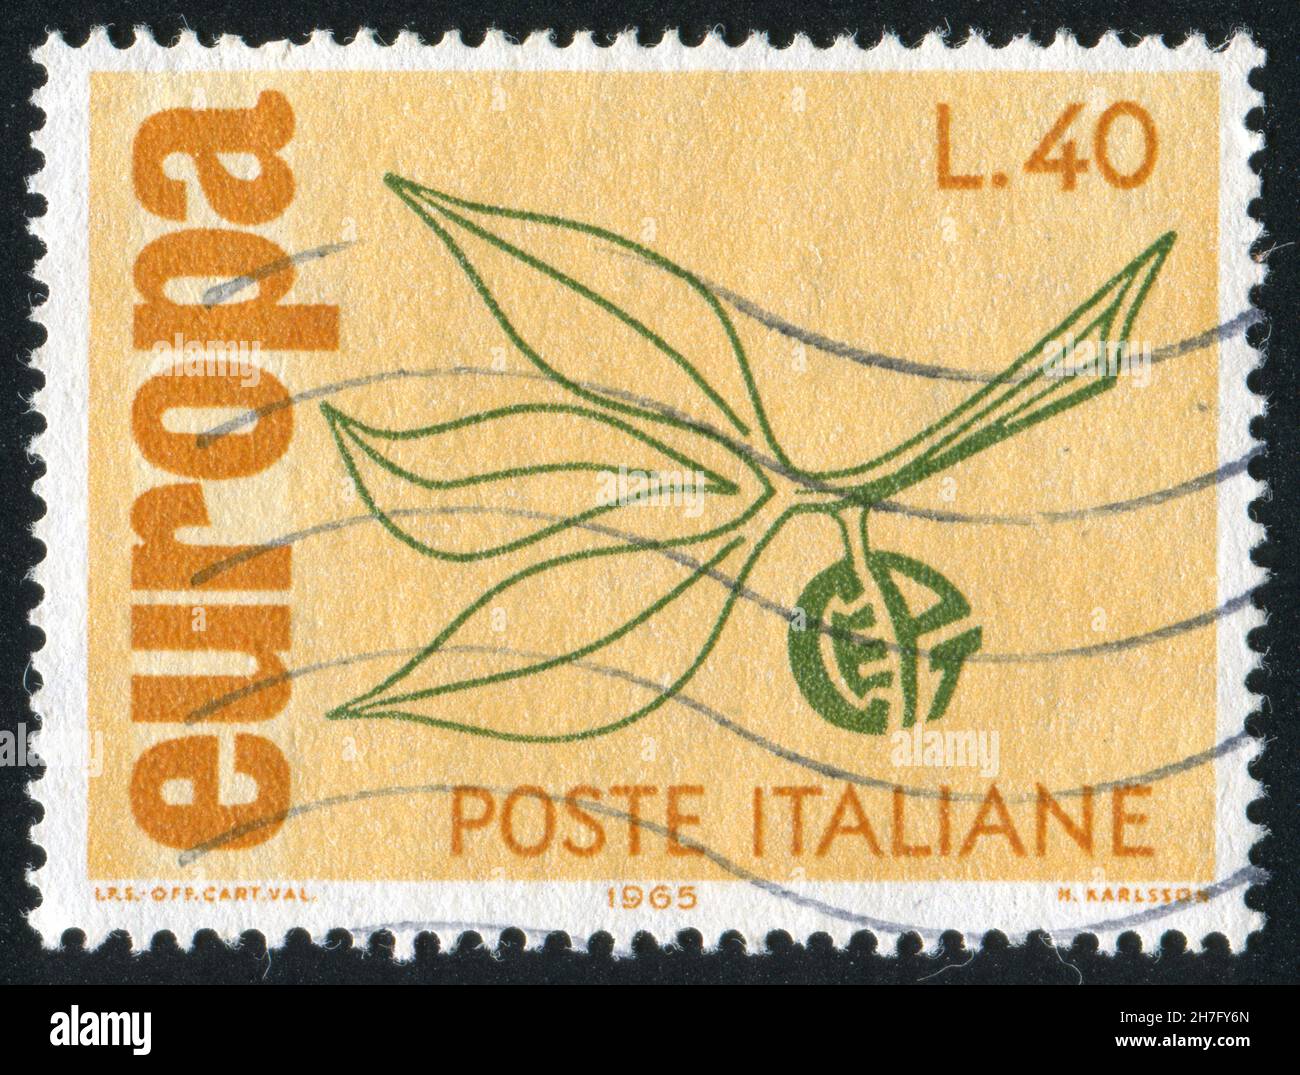 ITALY - CIRCA 1965: stamp printed by Italy, shows Stylized branch with leaves, Europa Issue, circa 1965 Stock Photo